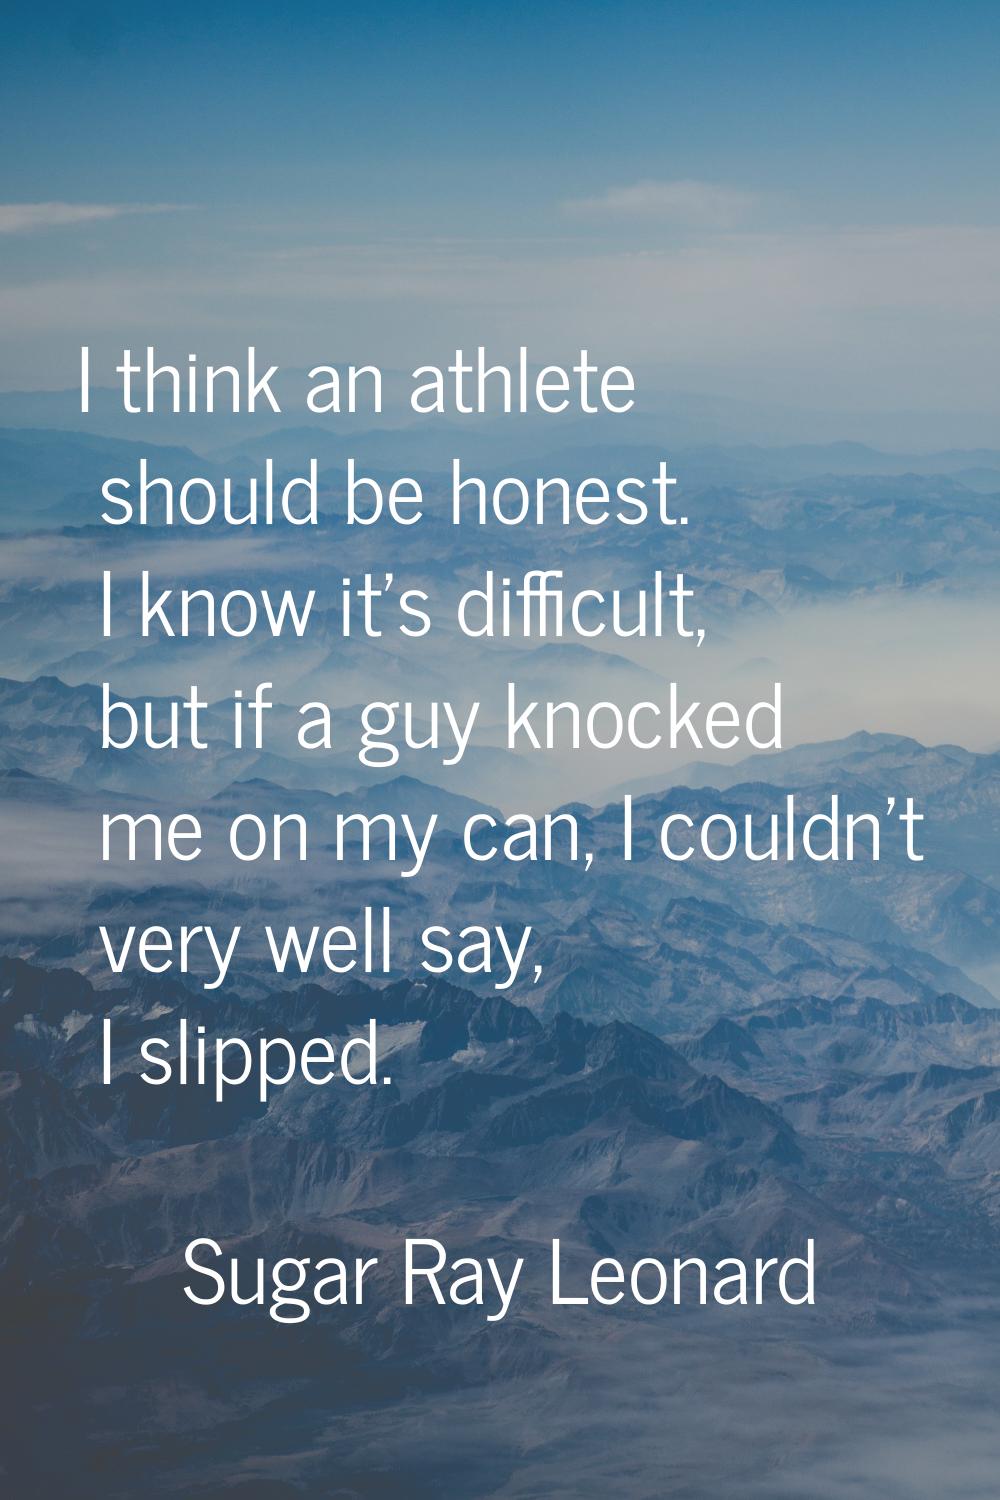 I think an athlete should be honest. I know it's difficult, but if a guy knocked me on my can, I co